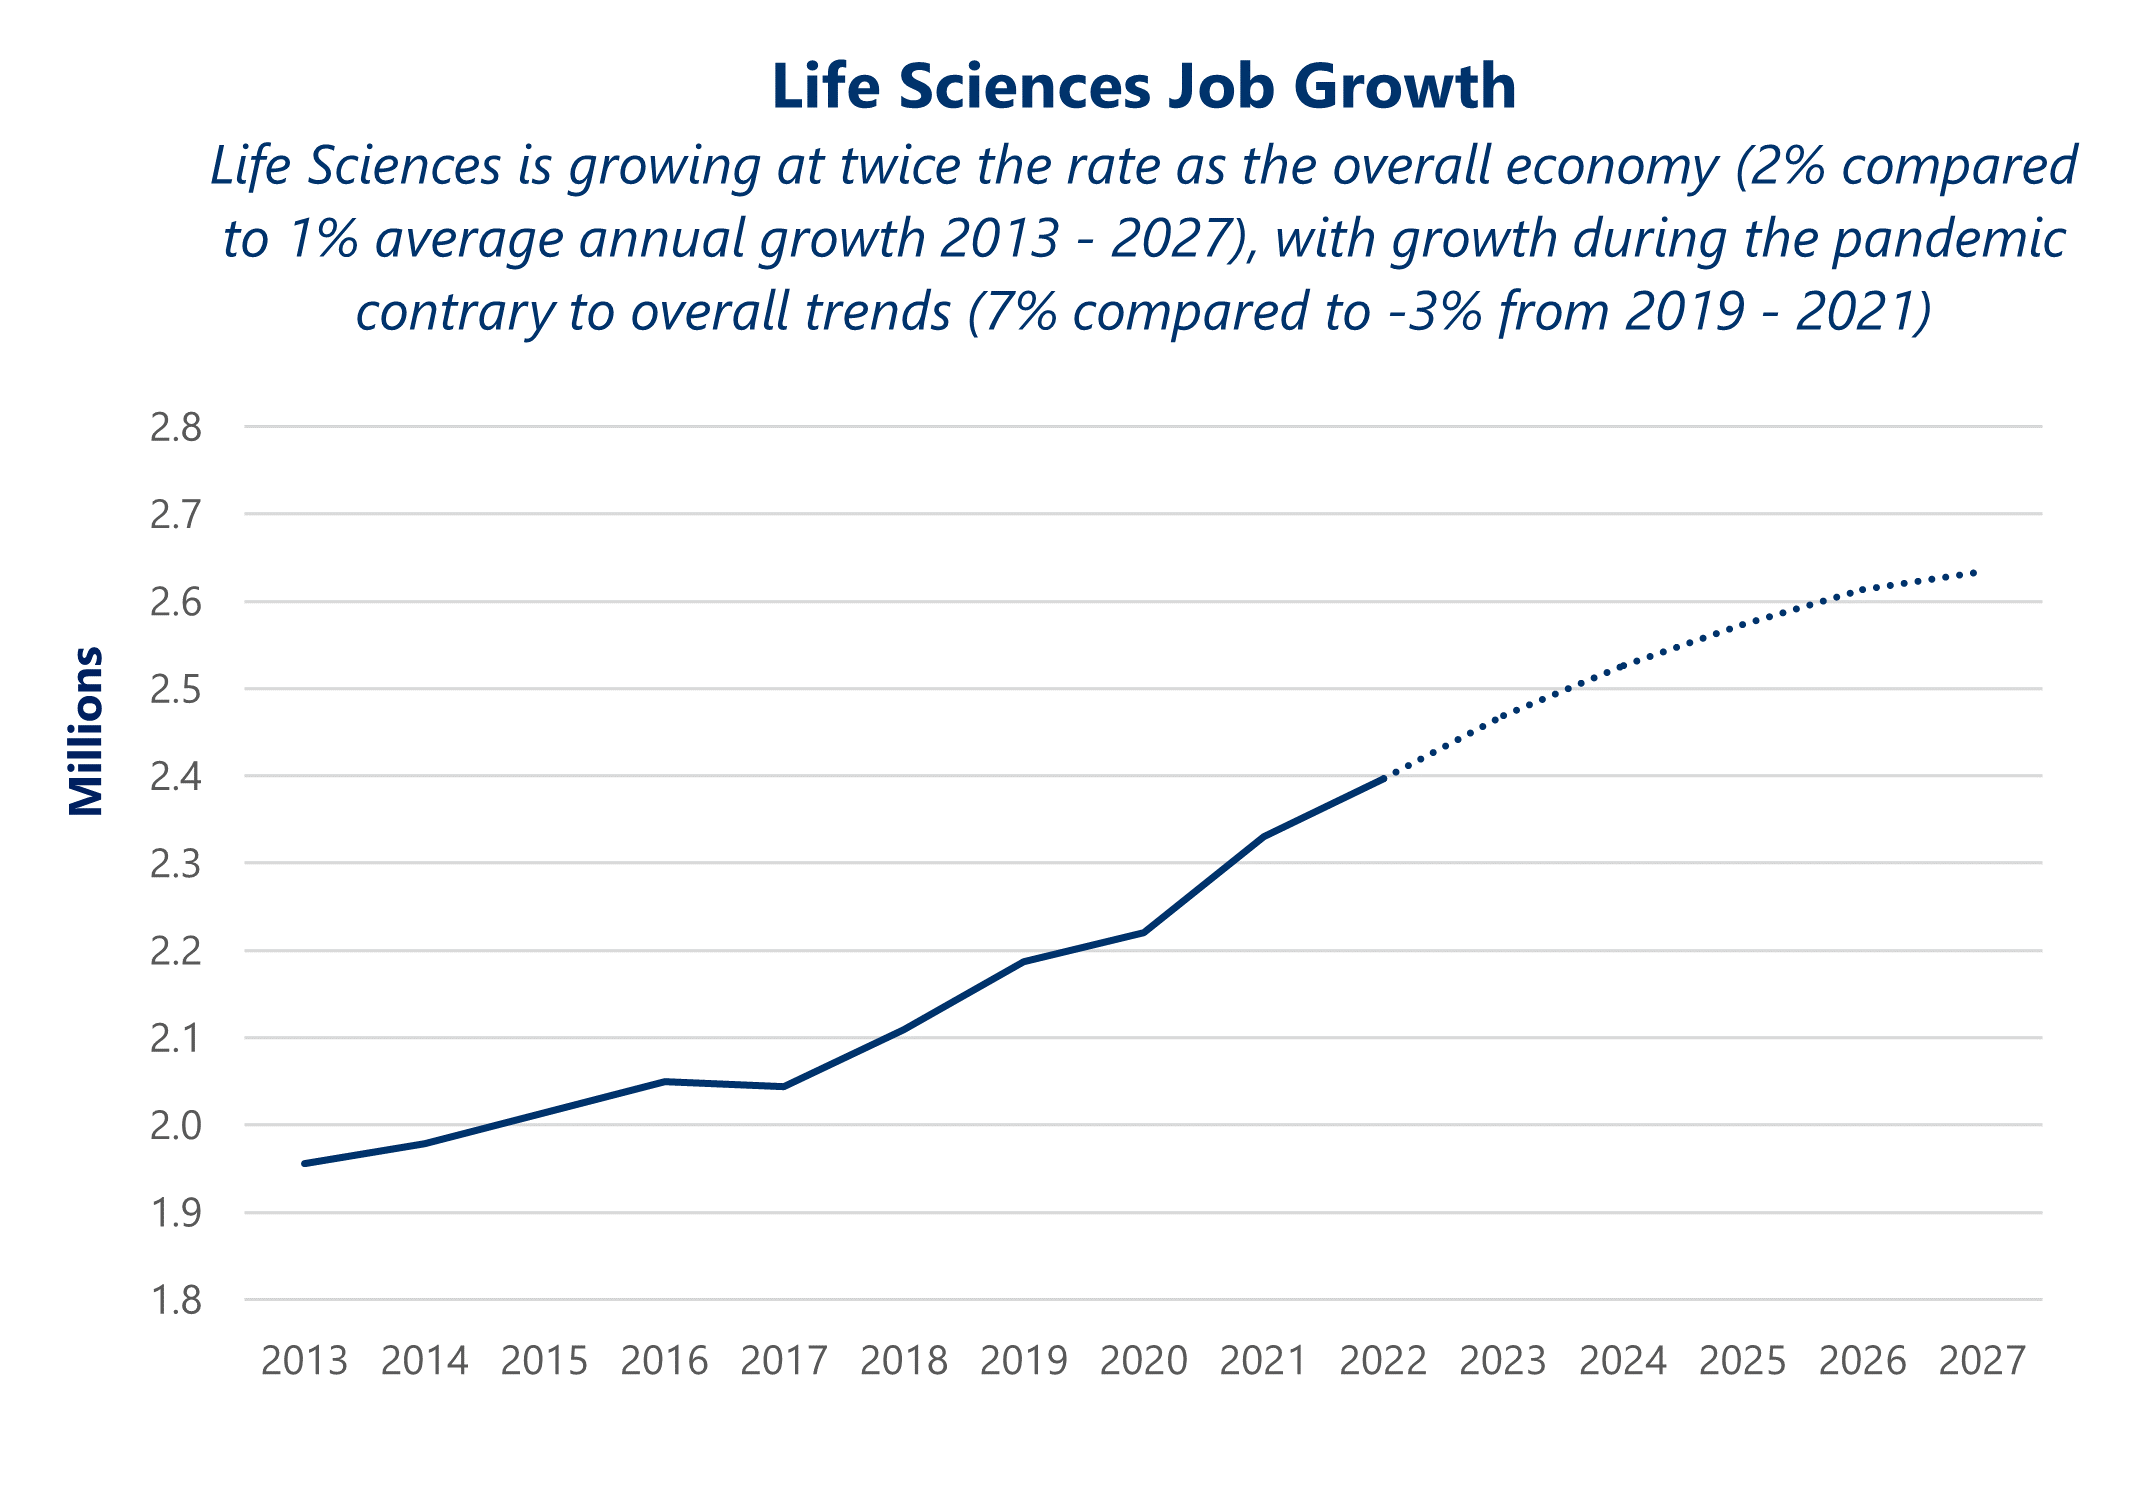 Life Sciences Job Growth from 2012 to 2027